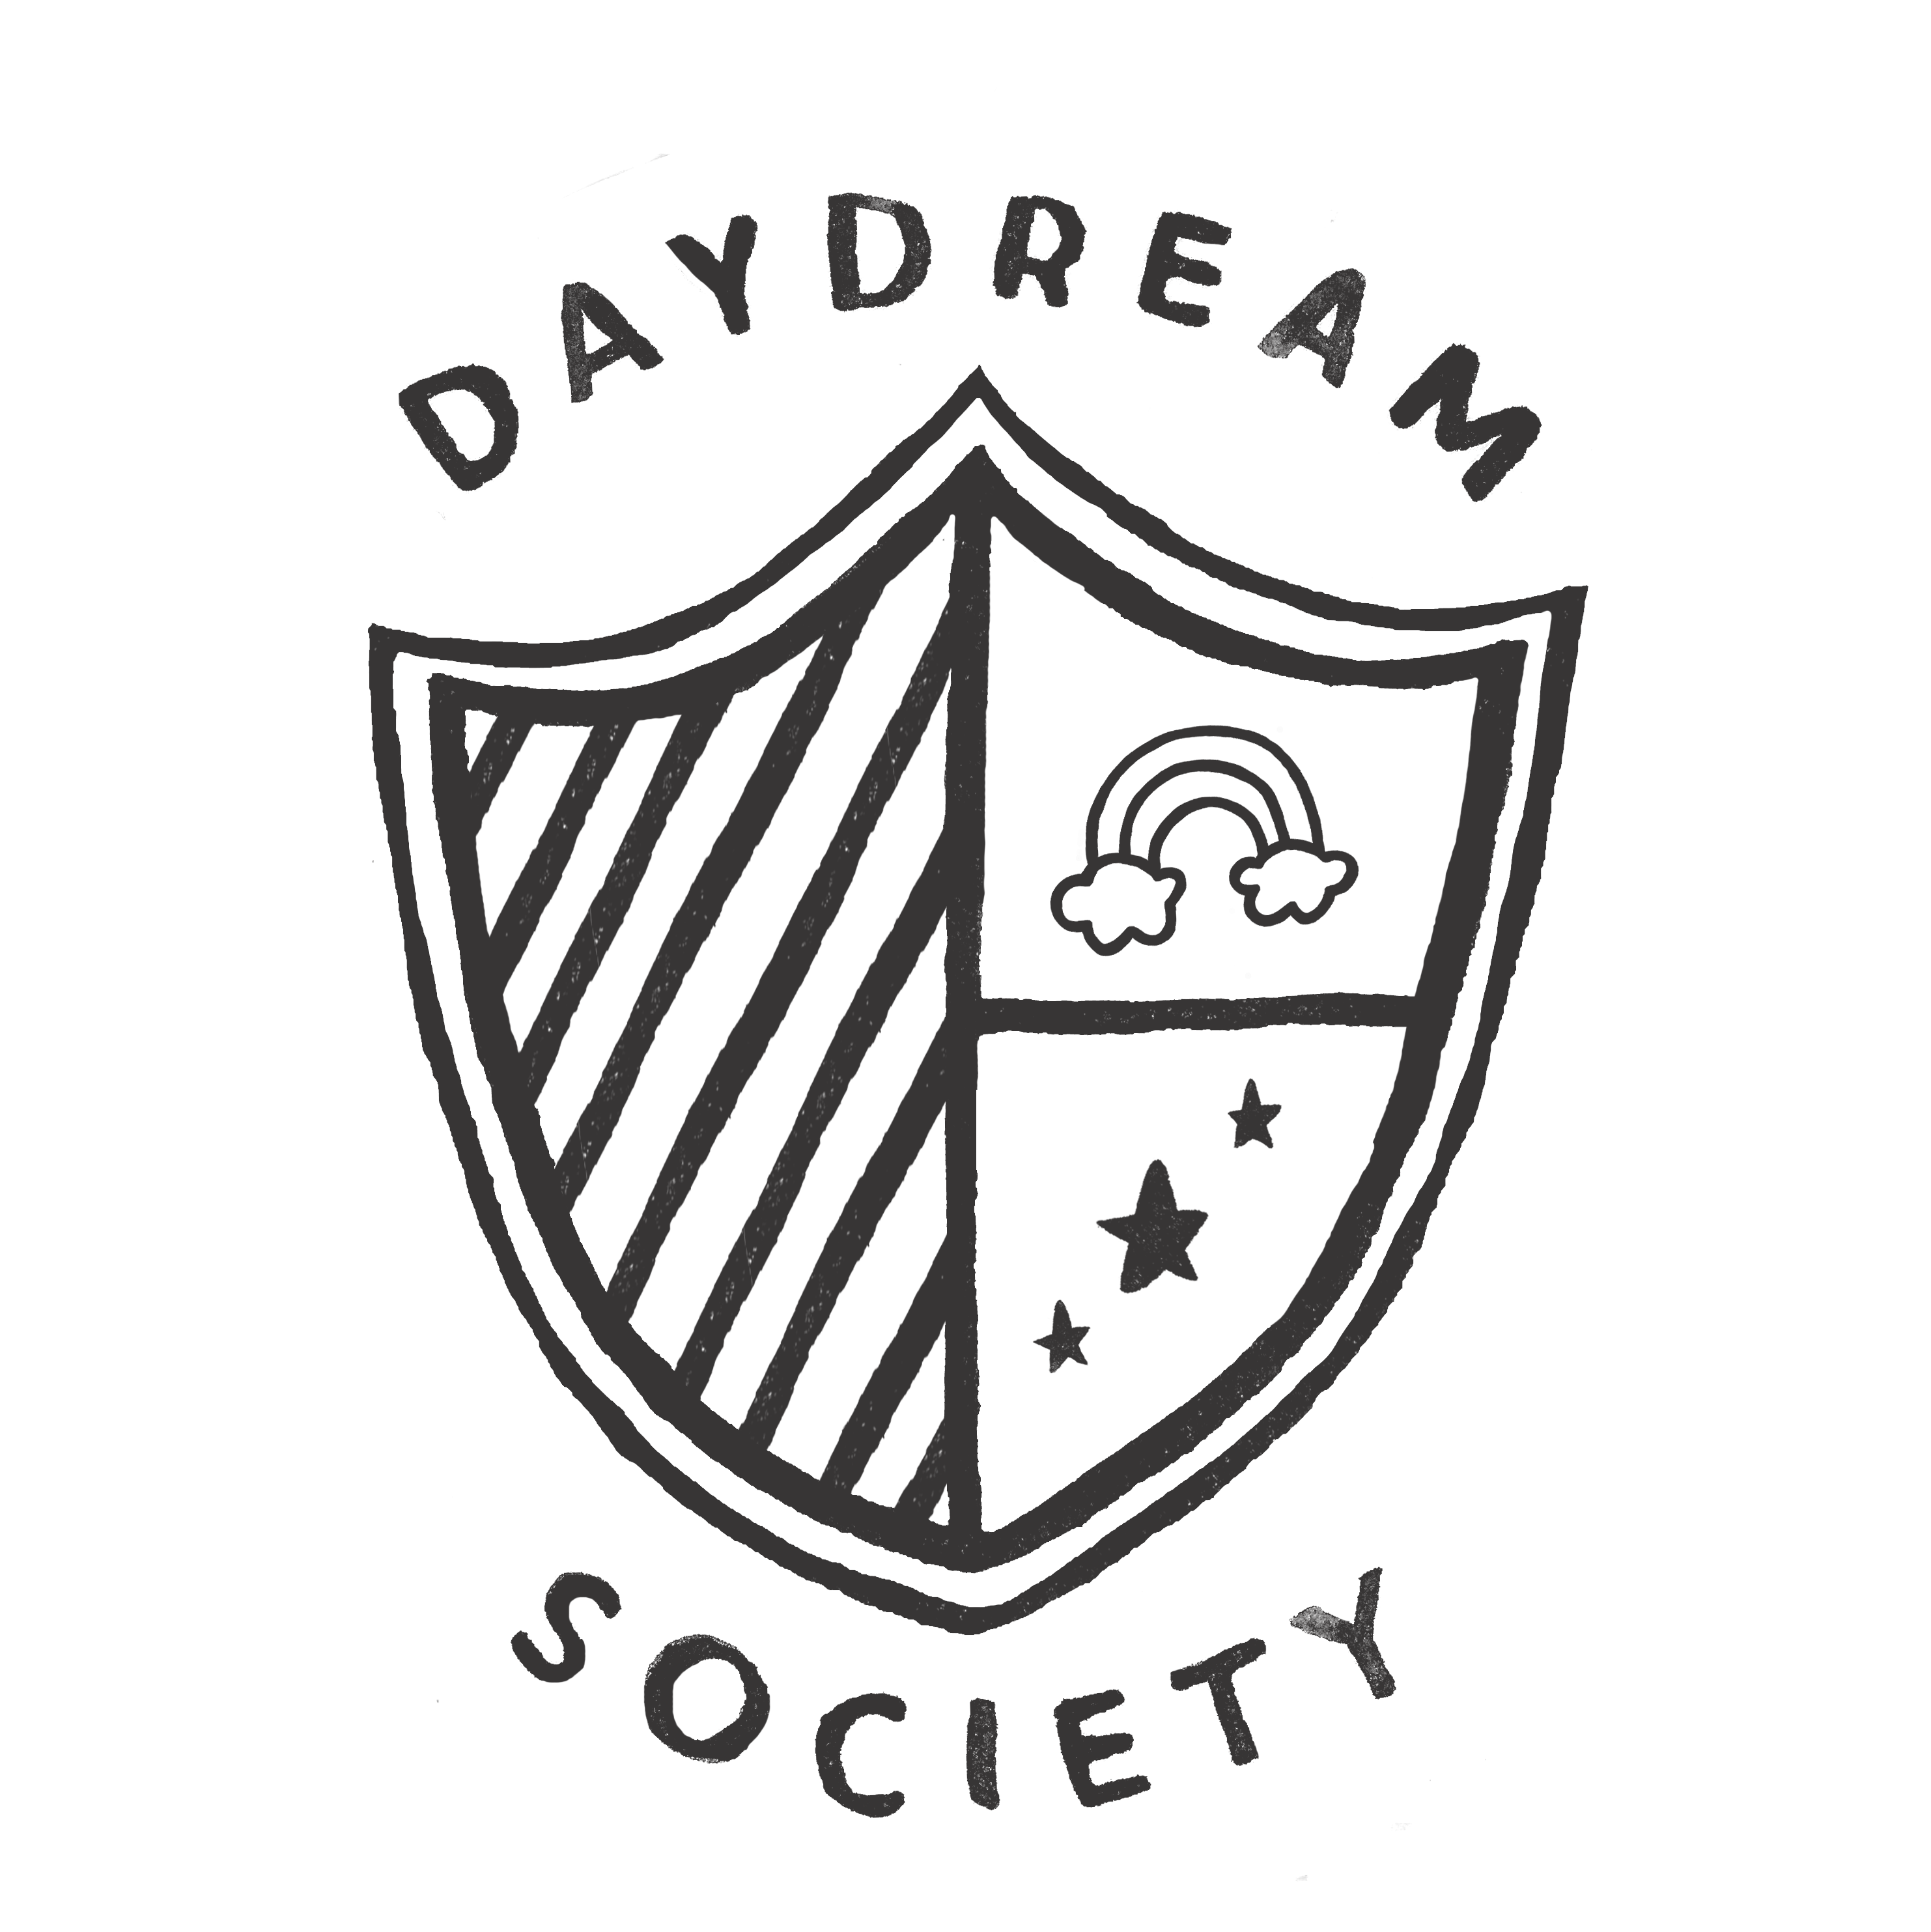 Daydream society premium party. Daydreaming clipart dream line